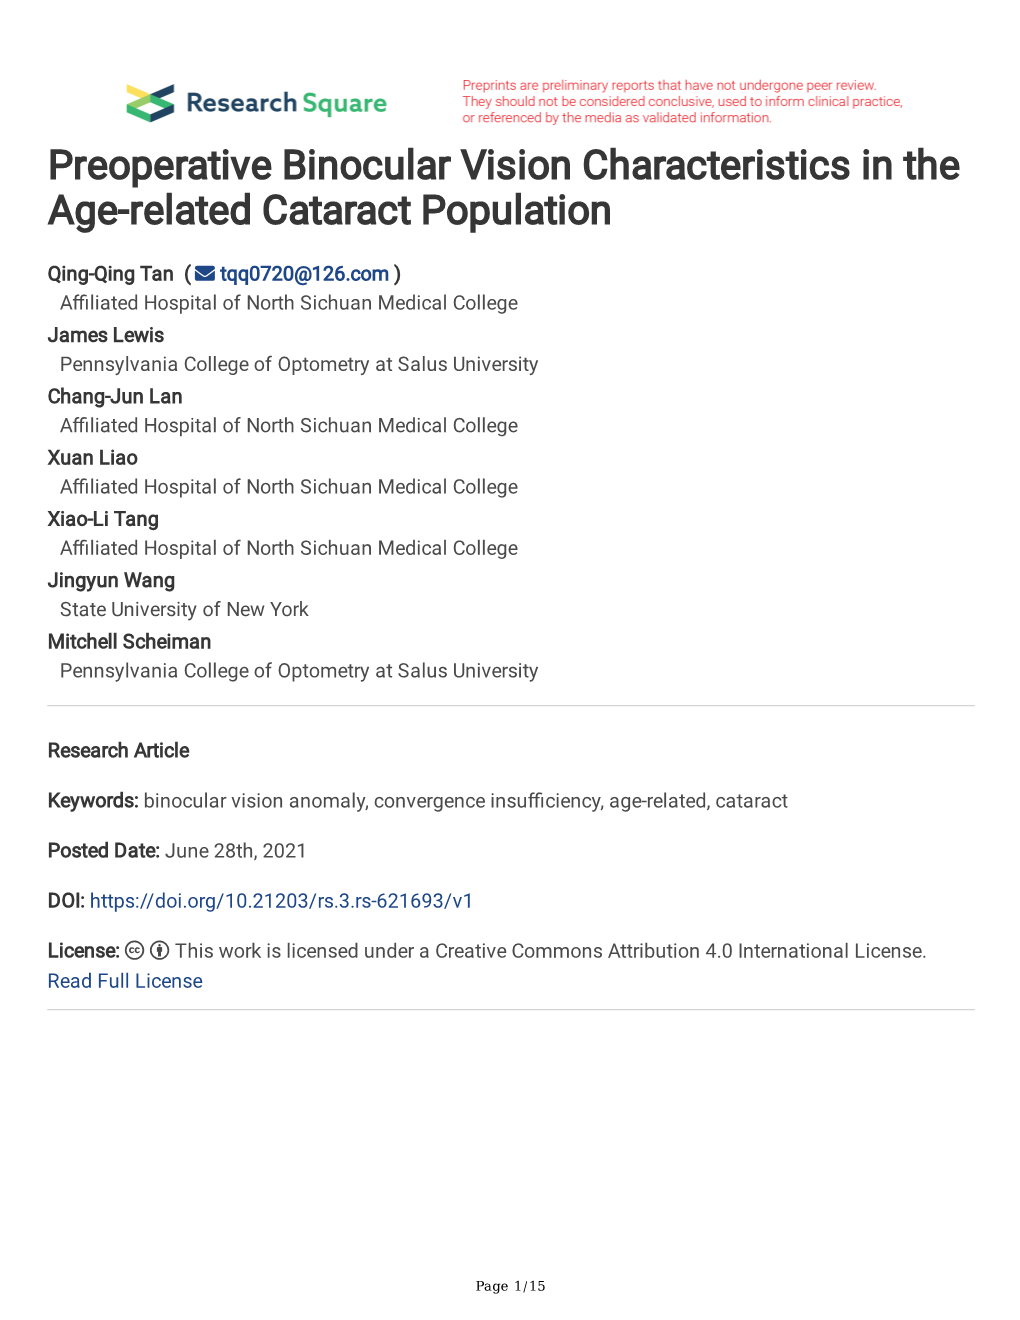 Preoperative Binocular Vision Characteristics in the Age-Related Cataract Population